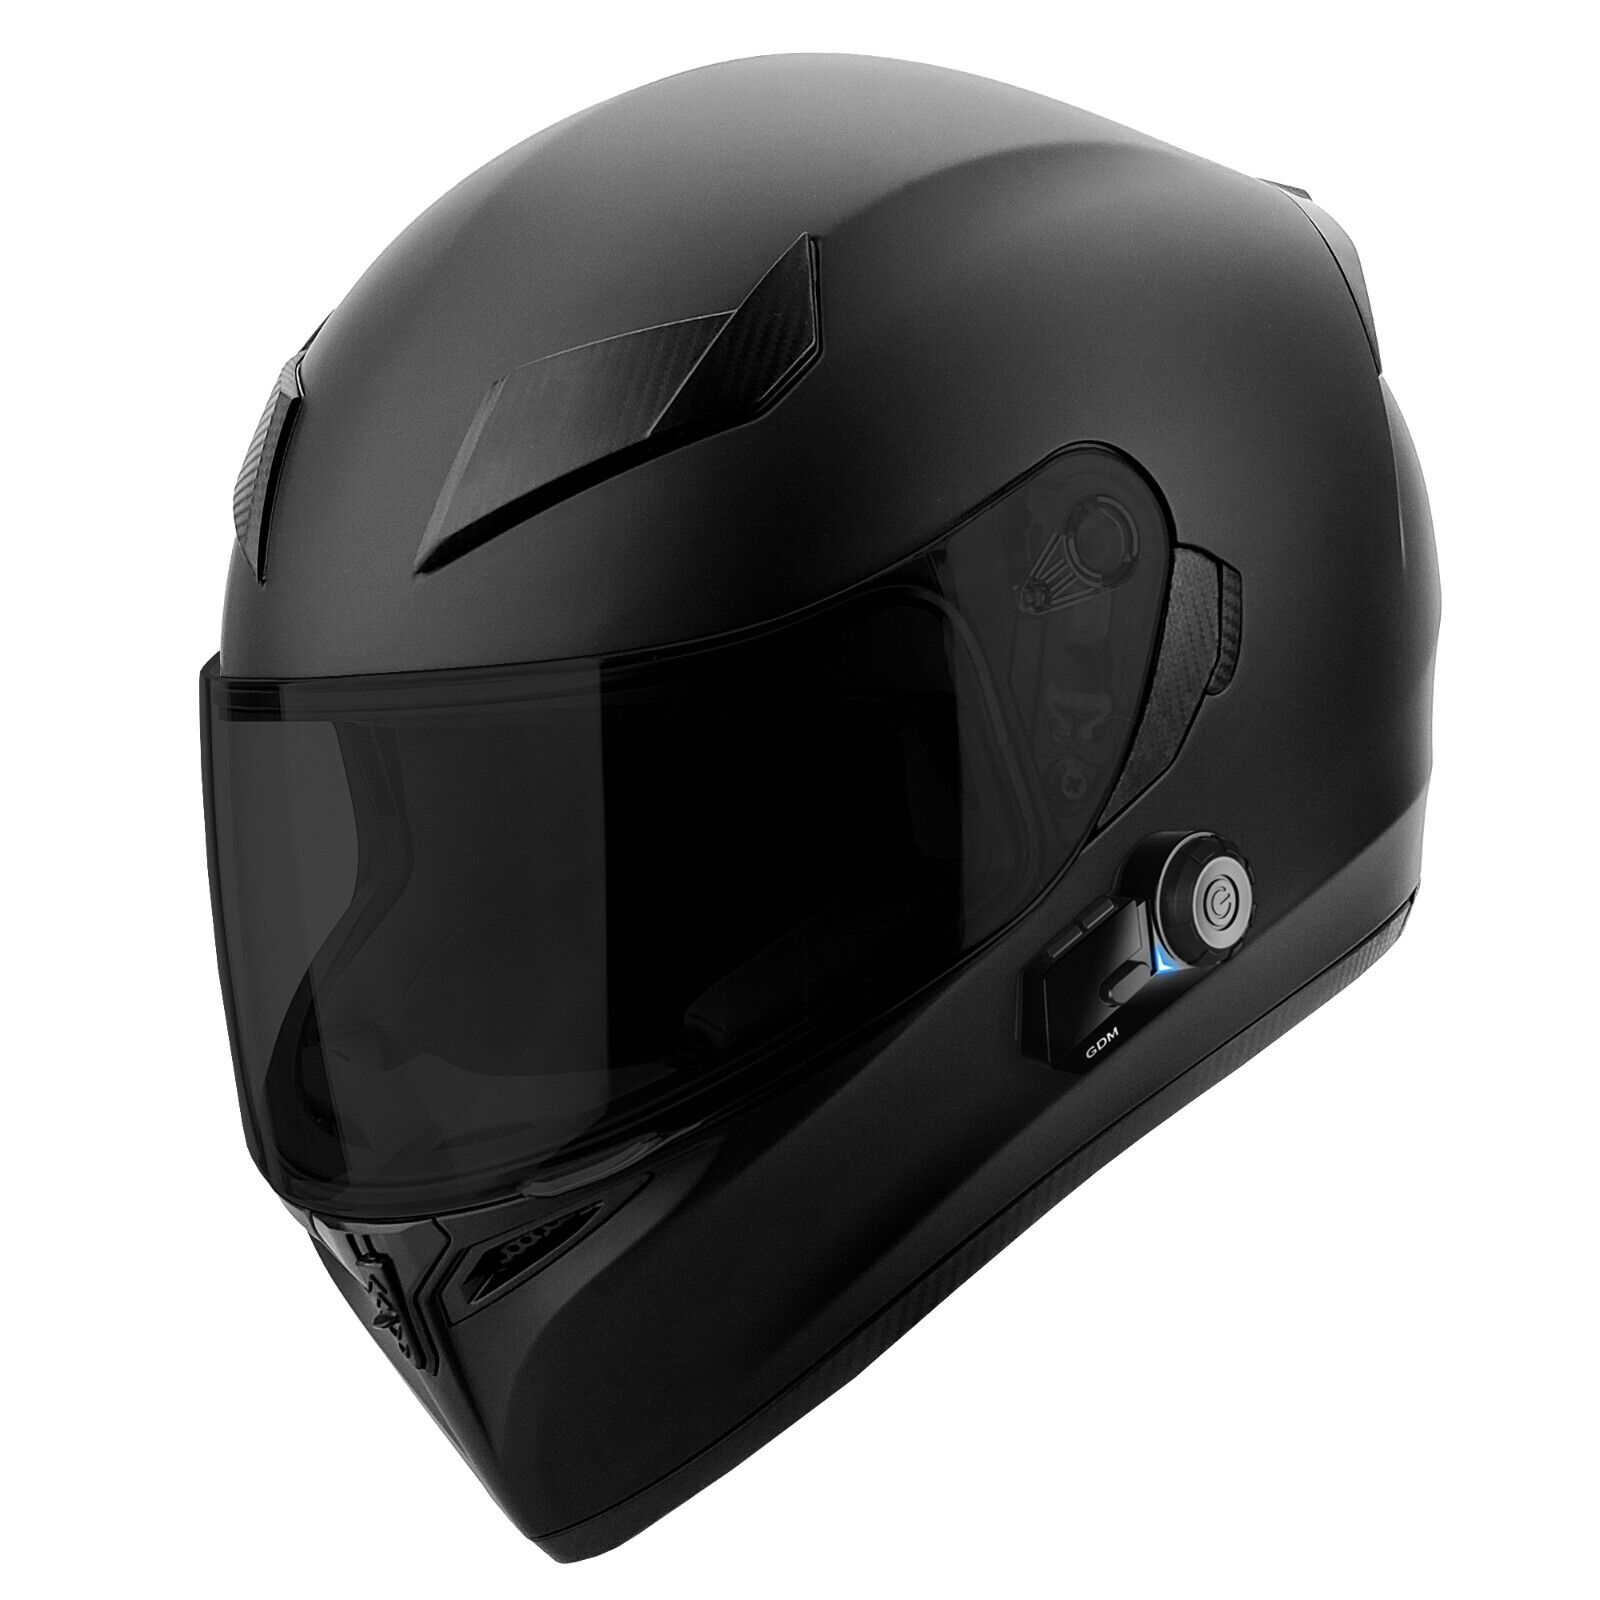 NWT Bluetooth Motorcycle Helmet GDM GHOST Supersonic Full Face Matte Black